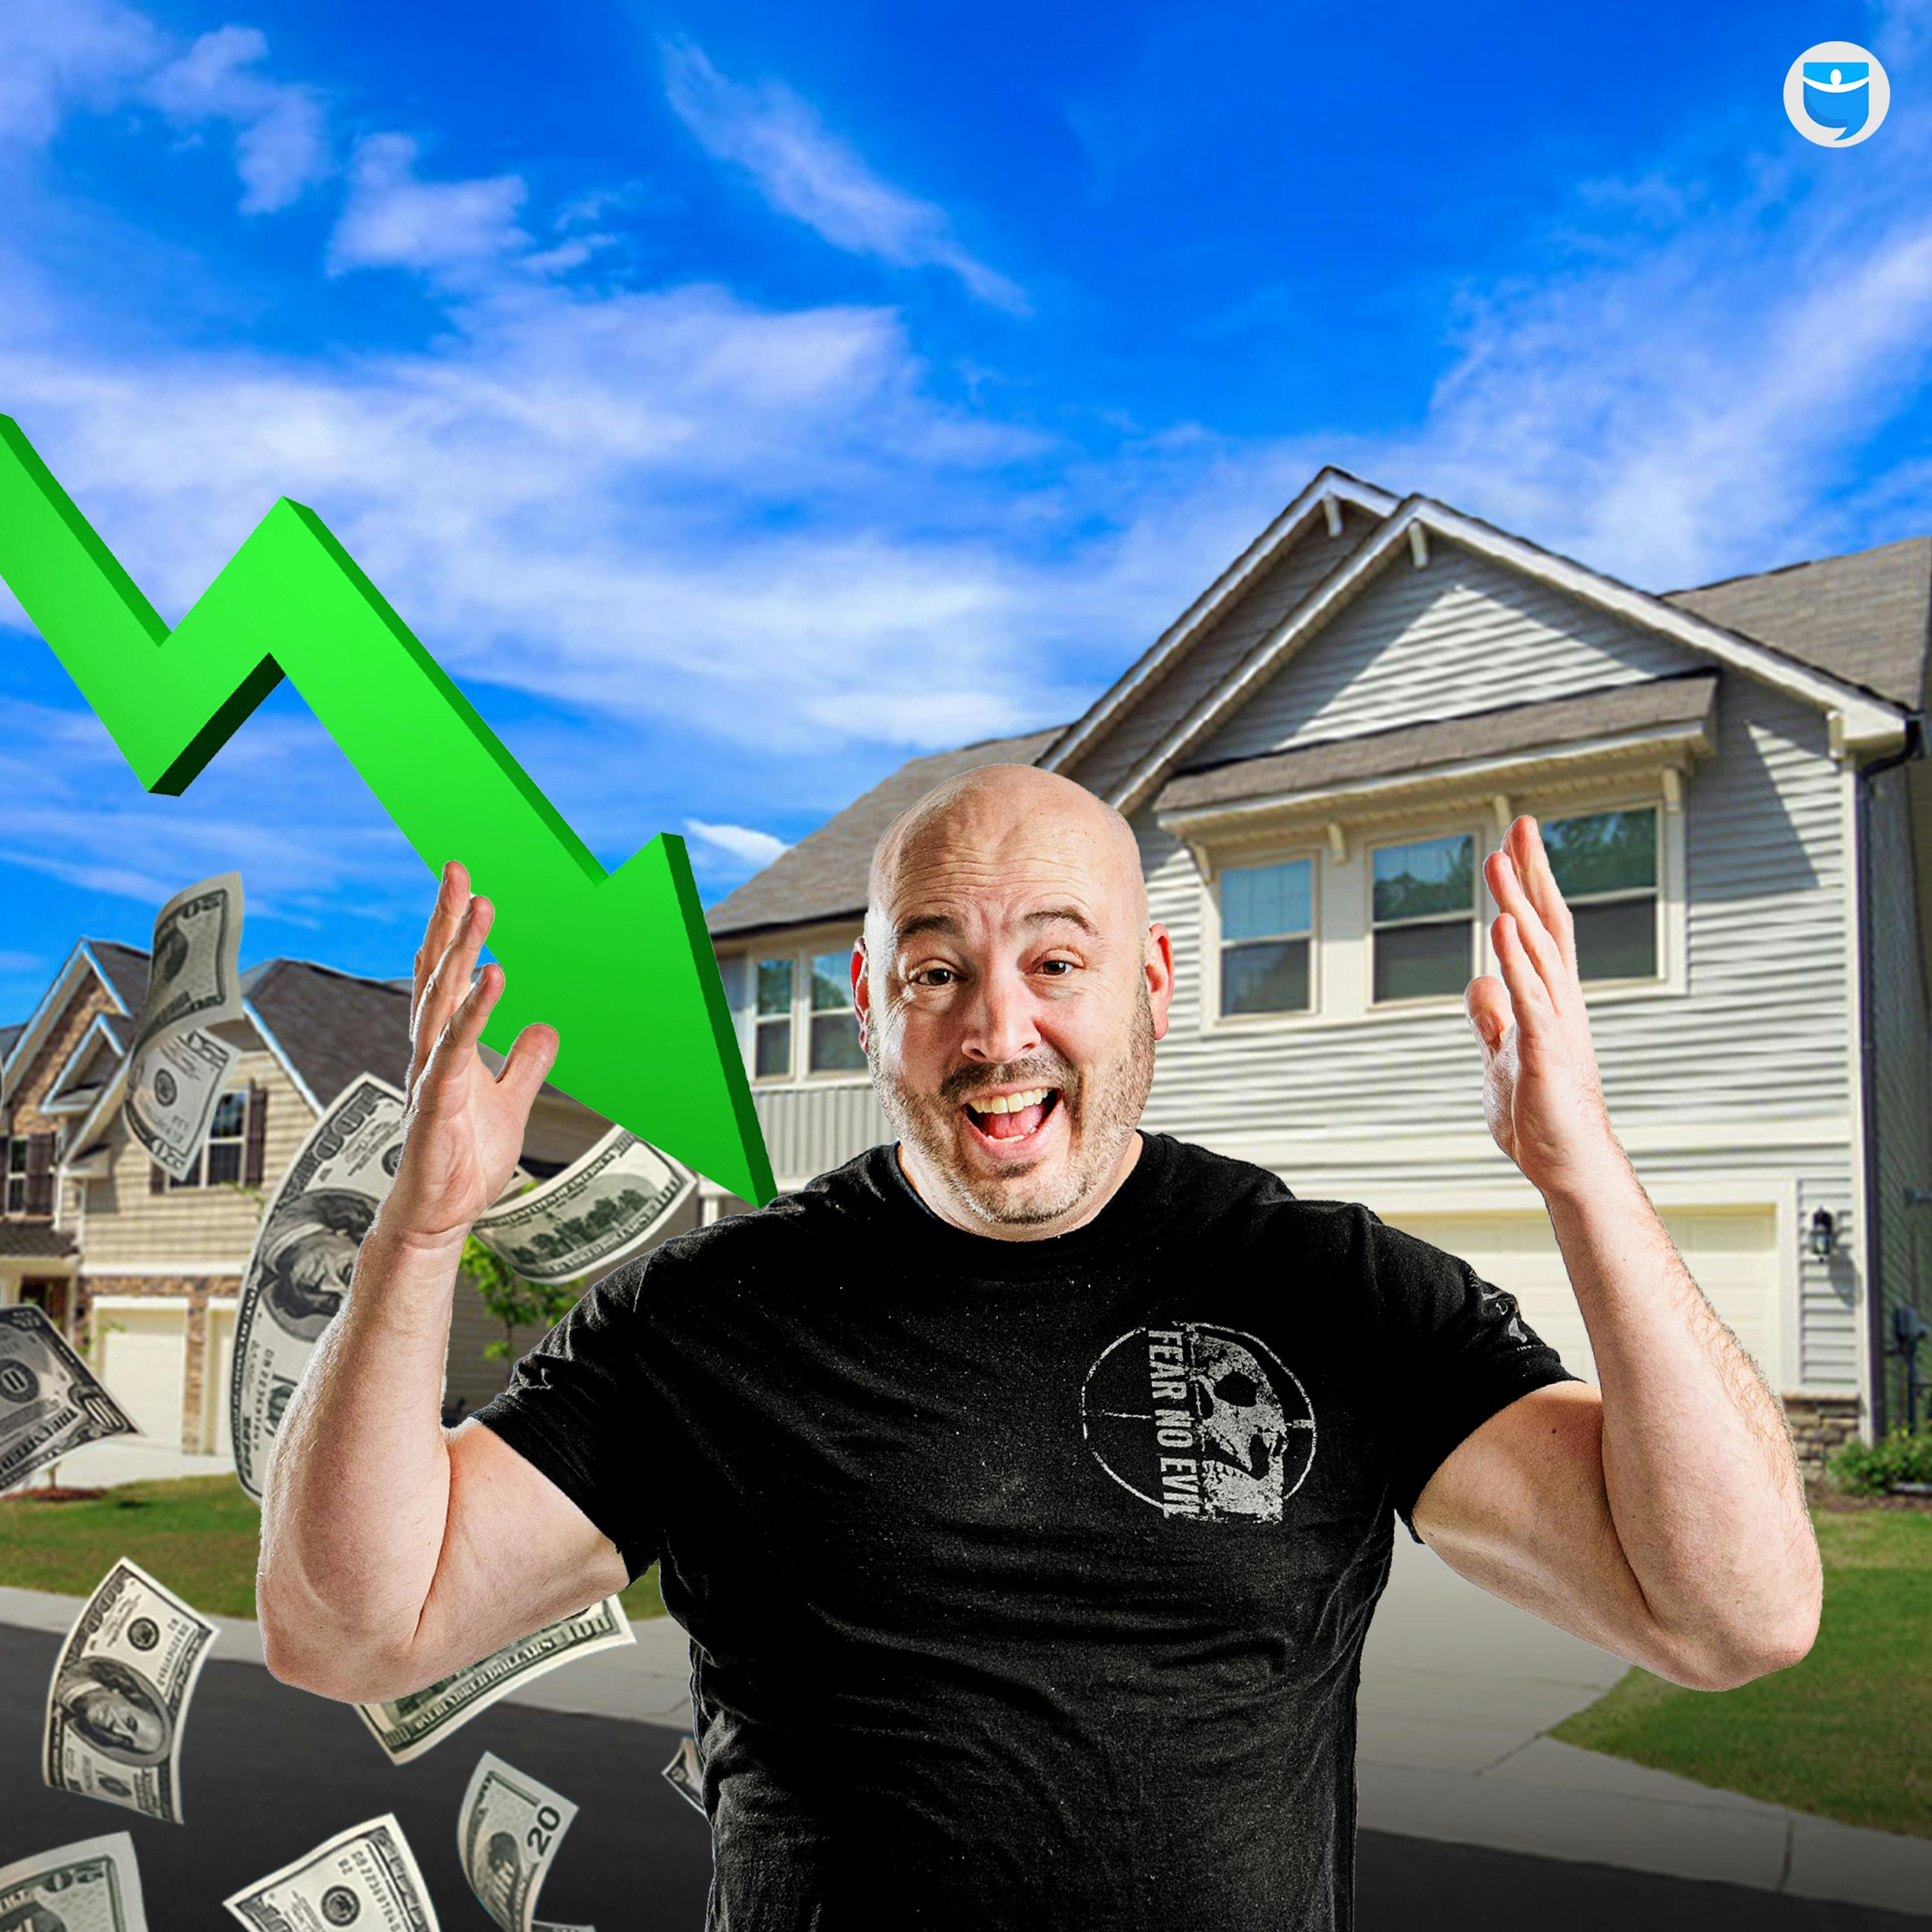 859: BiggerNews: Fed Announces Rate Cuts, Jobs Grow, and Boomers Buy Up Housing